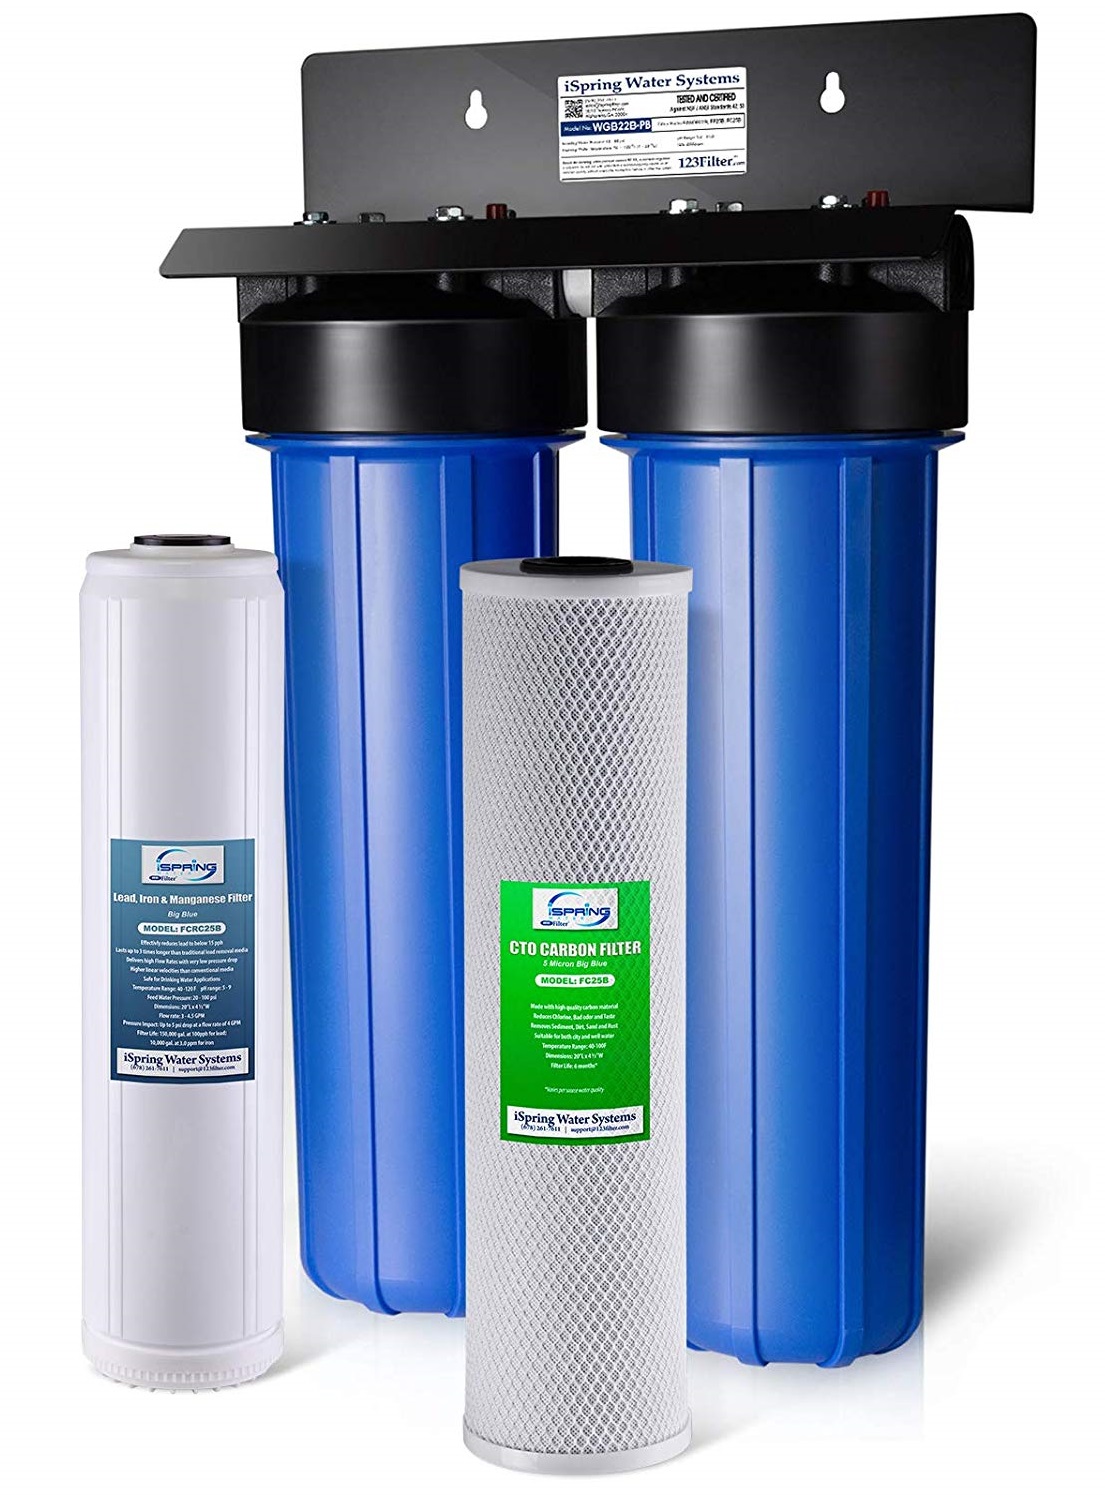 Best Whole House Water Filter Systems in 2022 Reviews & Buying Guide